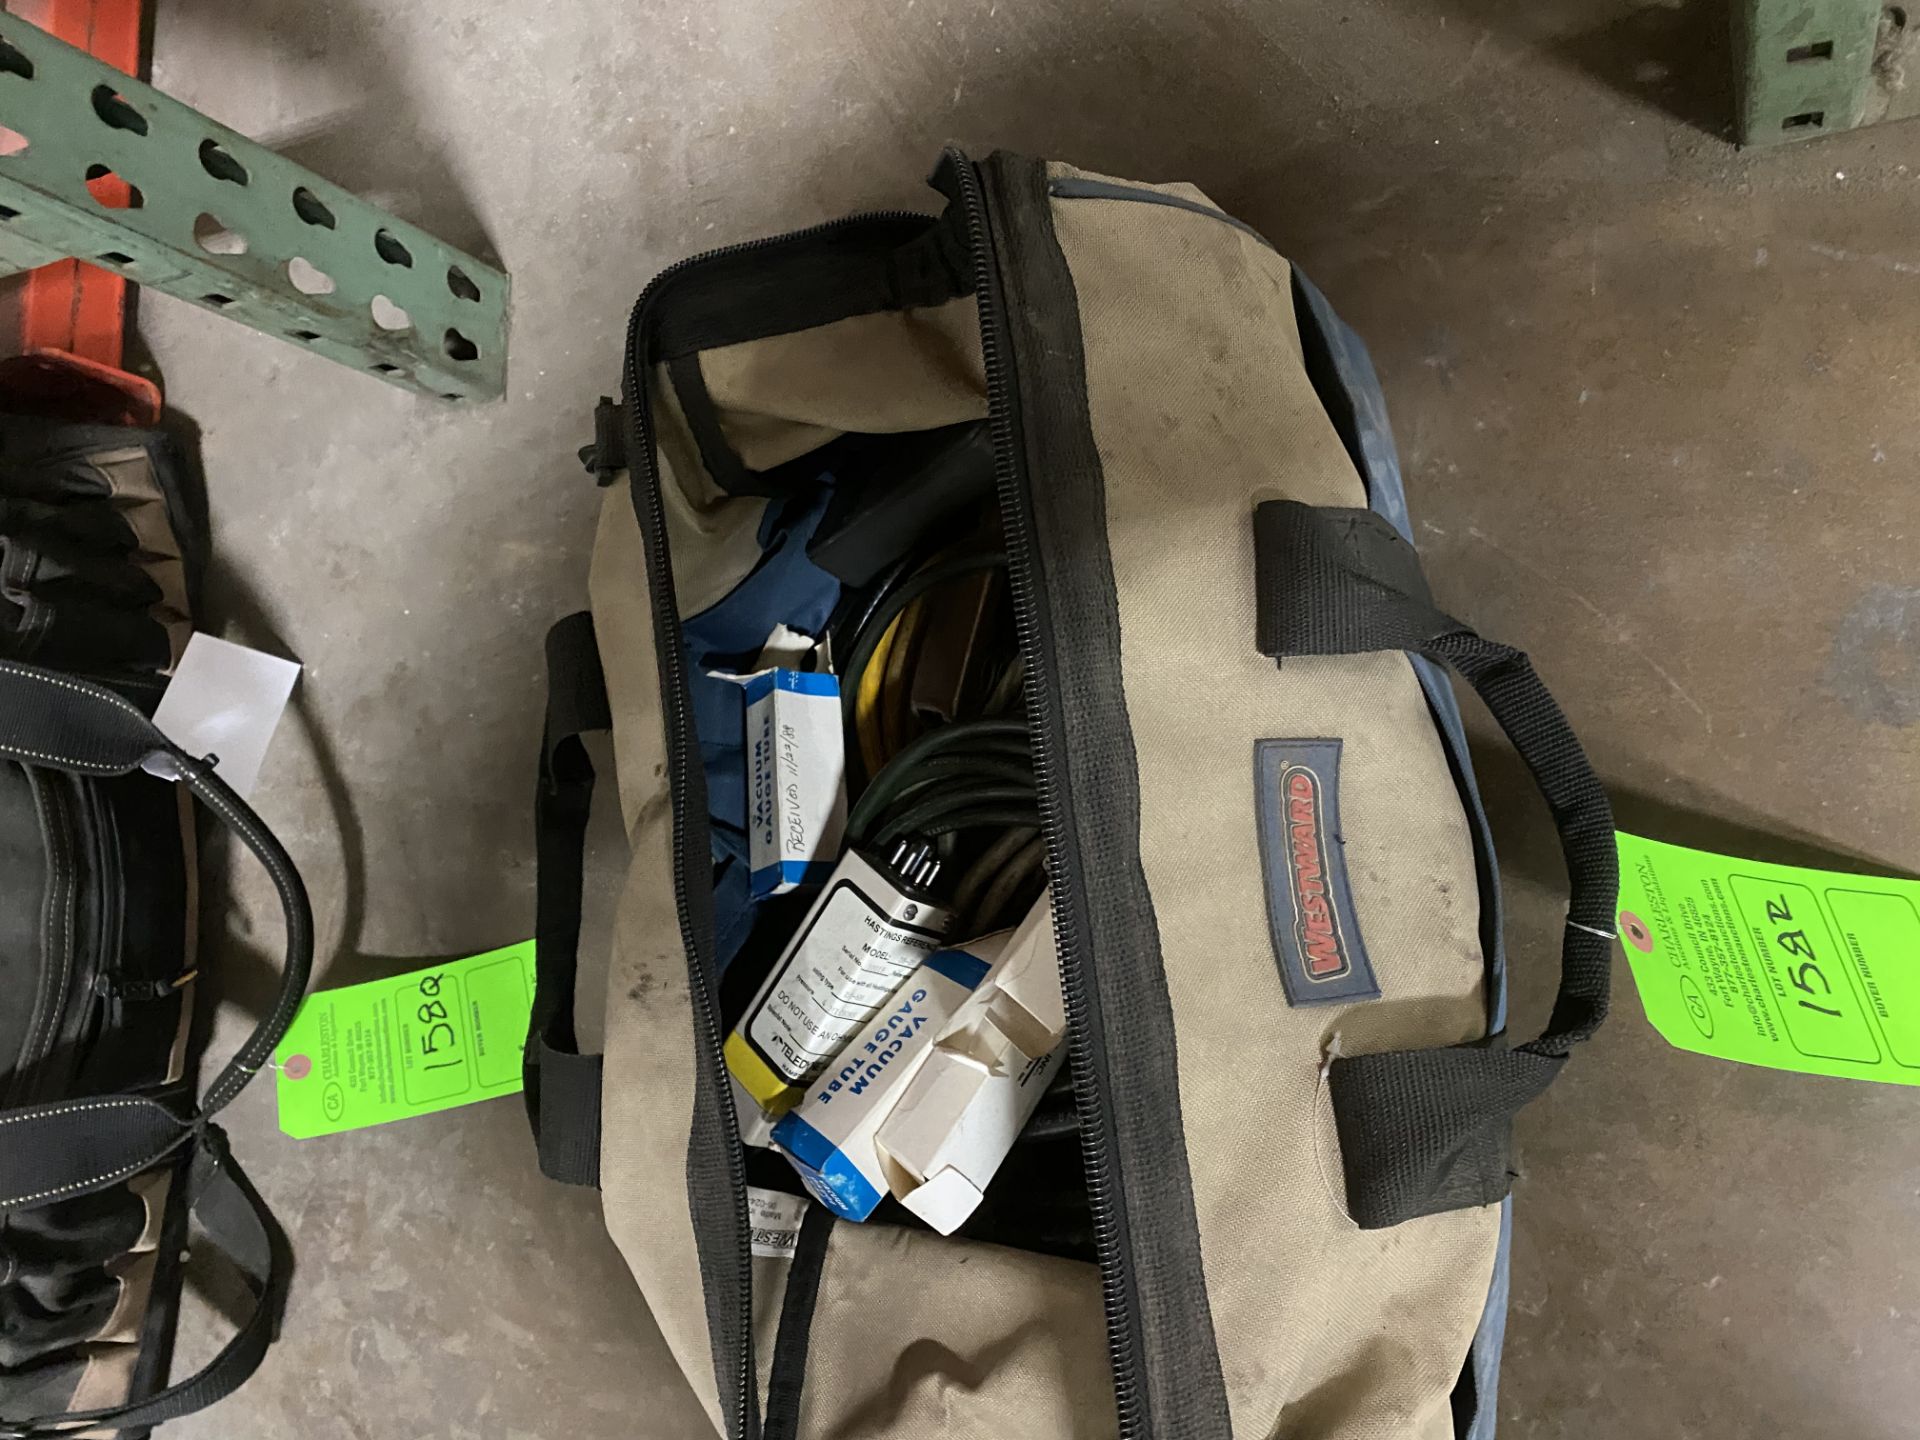 BAG OF TEST CORDS (THIS ASSET WILL BE RELEASED UPON CONFIRMATION OF EHS TEST RESULTS)